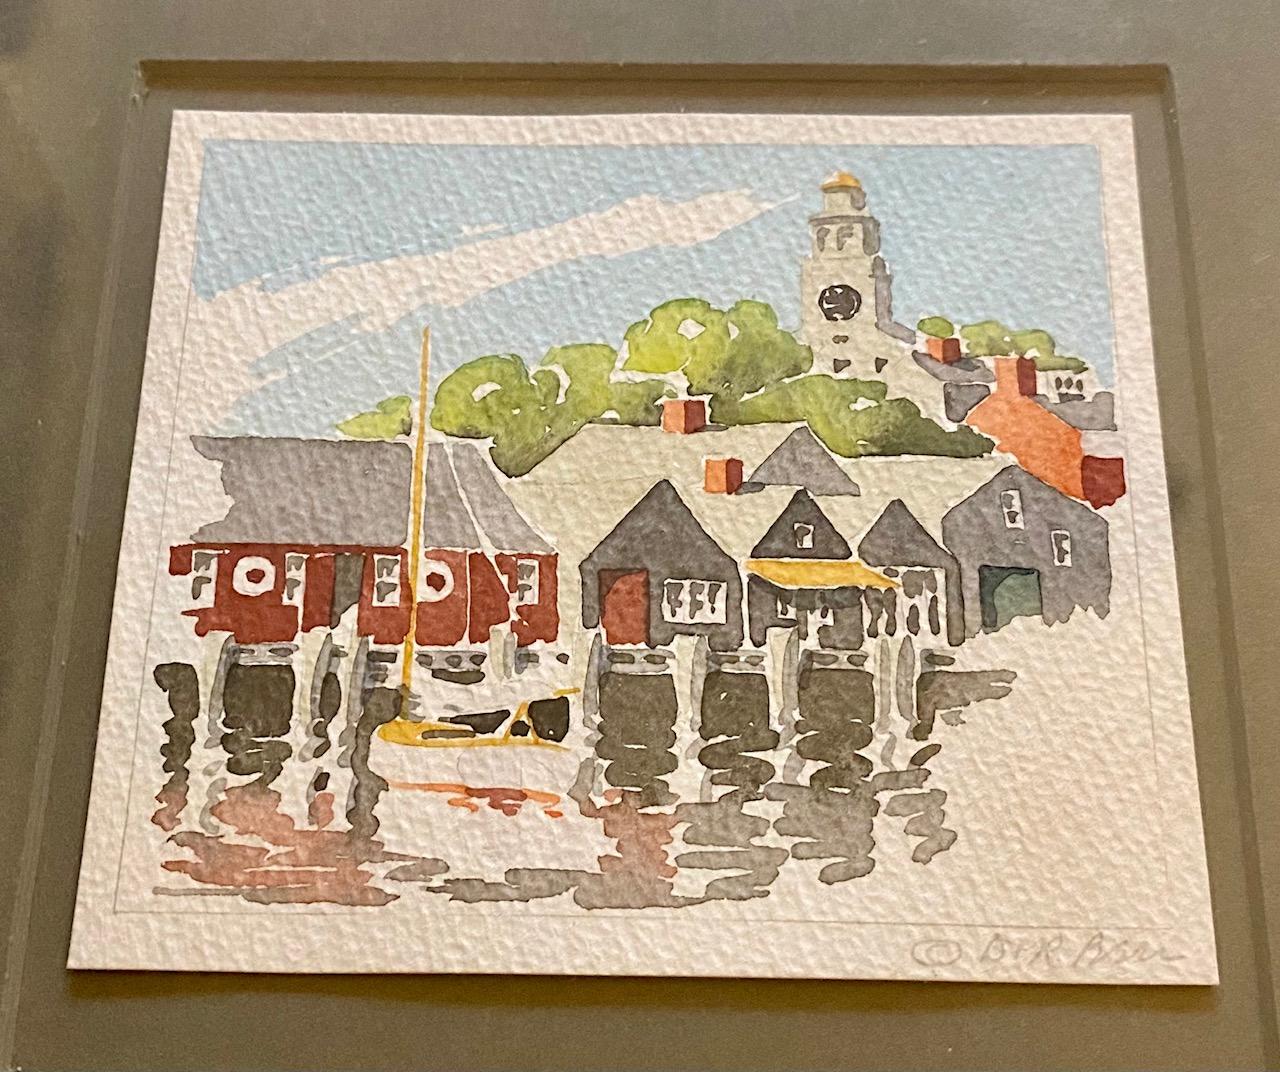 Vintage Nantucket Old South Wharf Watercolor by Doris & Richard Beer, circa 1940, a watercolor on paper view of Old South Wharf, signed in pencil power right. Doris and Richard Beer (1898-1967 and 1893-1959 respectively) produced a well-known series